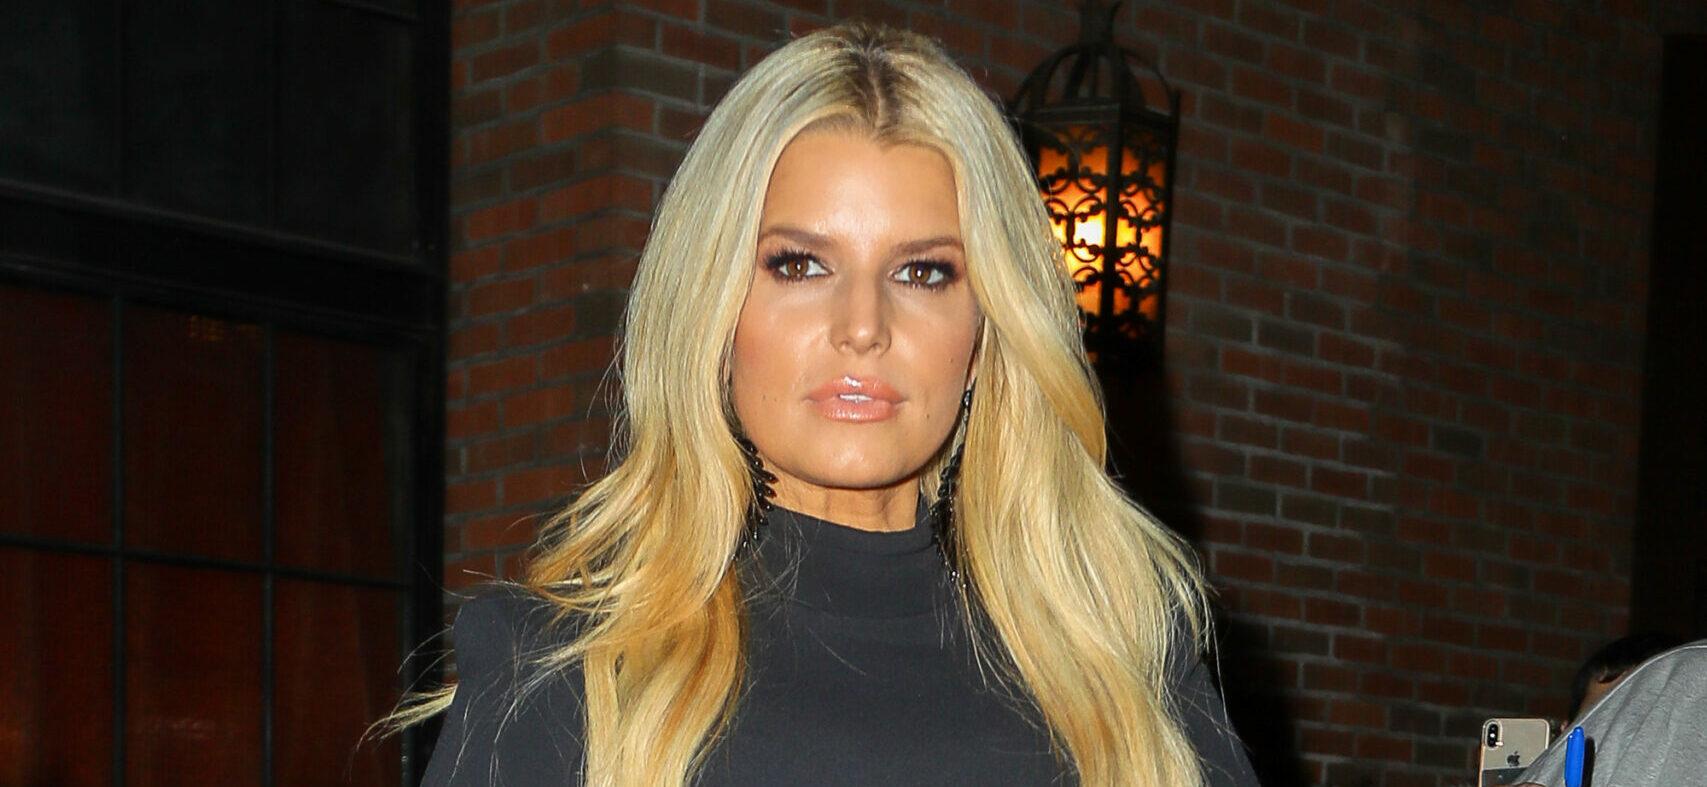 Jessica Simpson seen posing outside the Bowery Hotel in NYC on Feb 04, 2020.